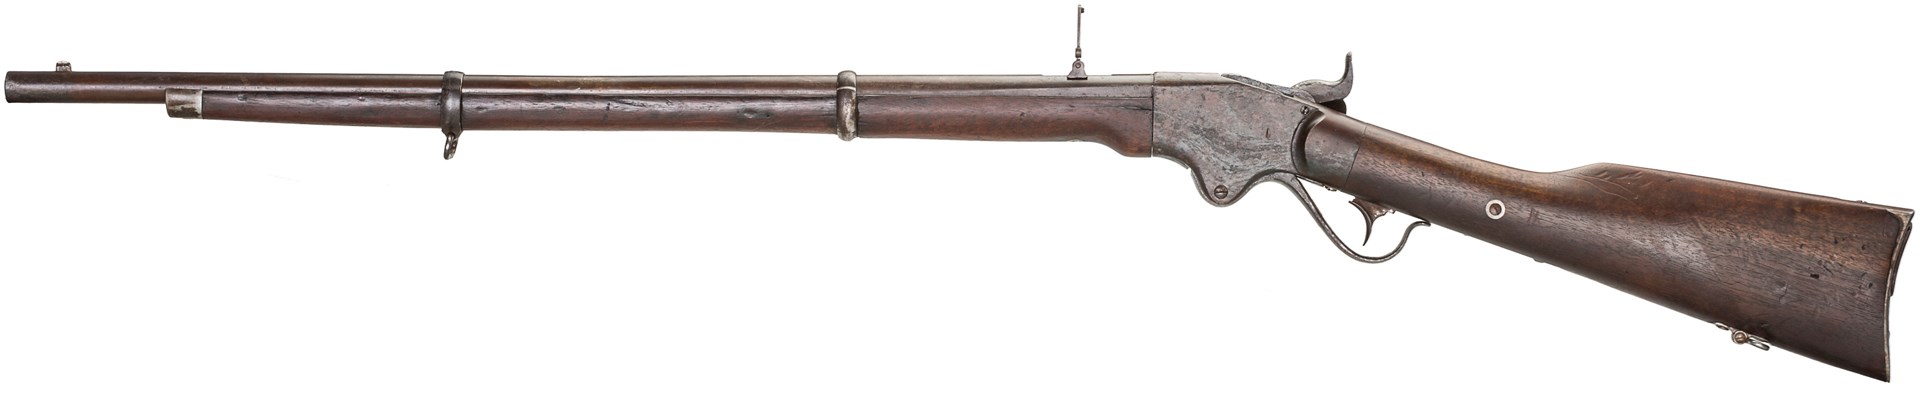 The distances between the receiver, the barrel bands, and the nose cap on the Frankenspencer do not correspond with any known military shoulder arm. Image courtesy of American Rifleman magazine, photographed by Forrest MacCormack.